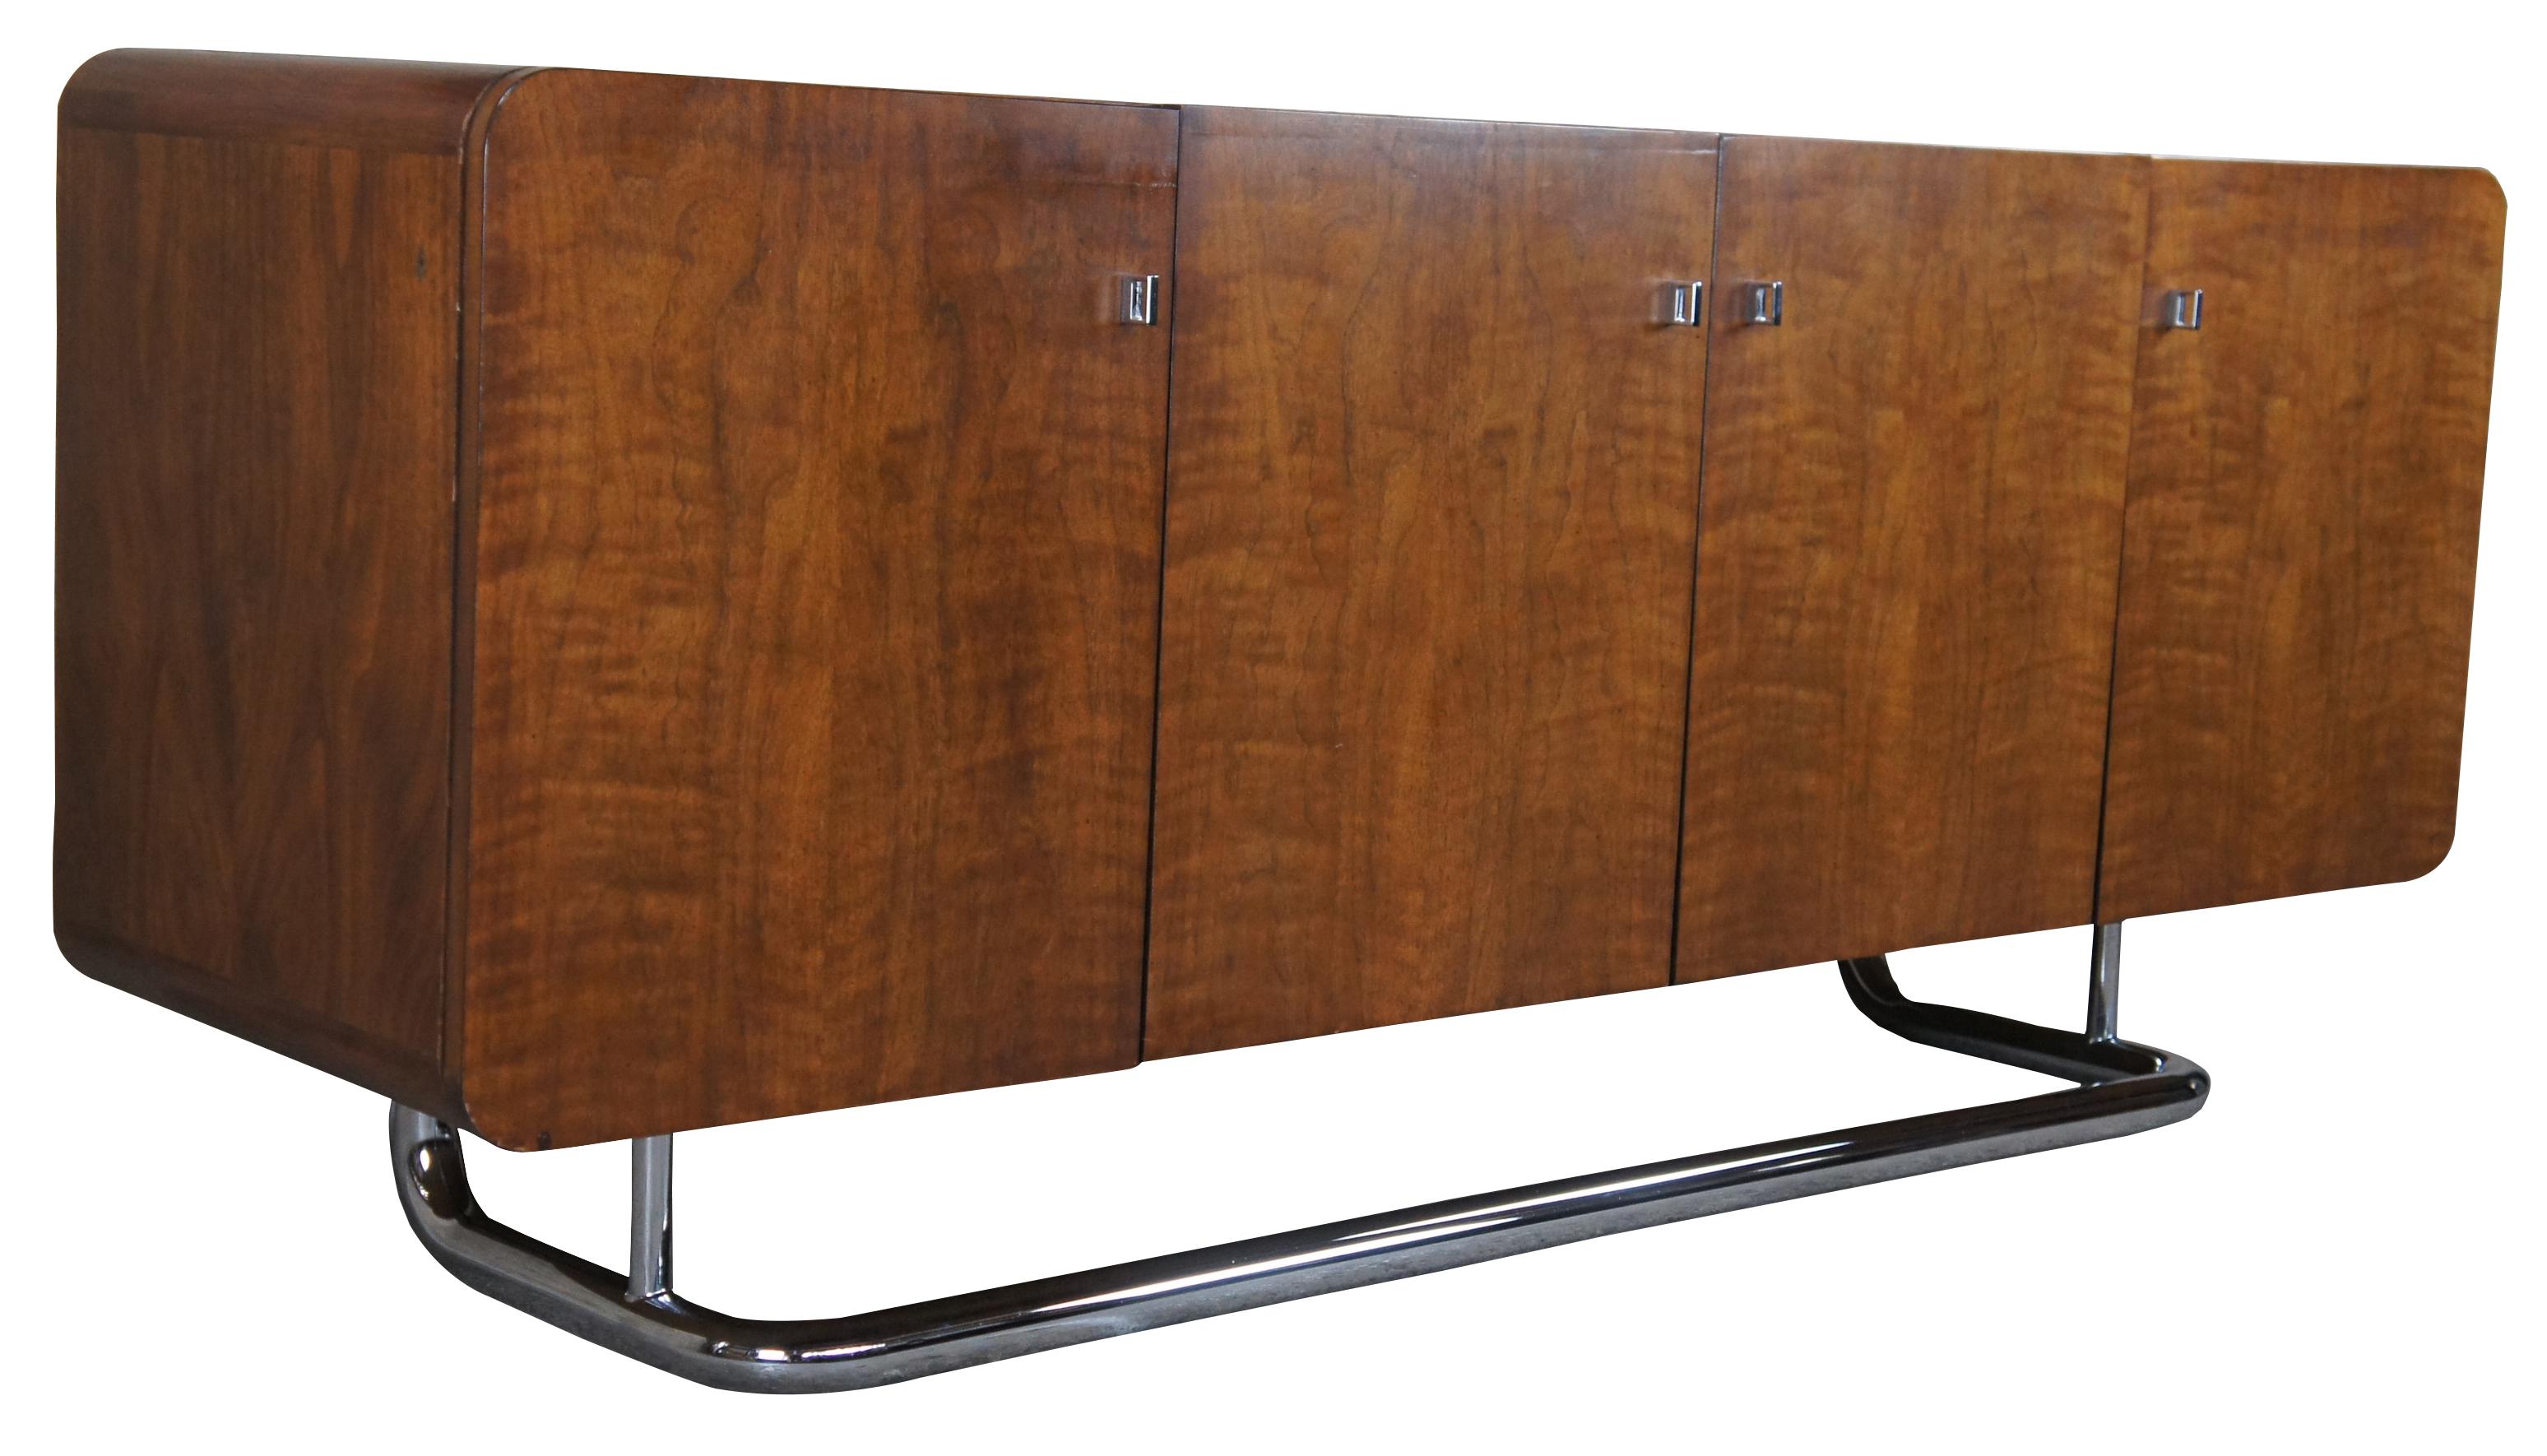 1970s Vintage Buffet, credenza or sideboard by Jack Cartwright for Founders Furniture. The carefully chosen American walnut veneers compliment the sleek tubular chrome base. Interior storage includes three center drawers flanked by adjustable